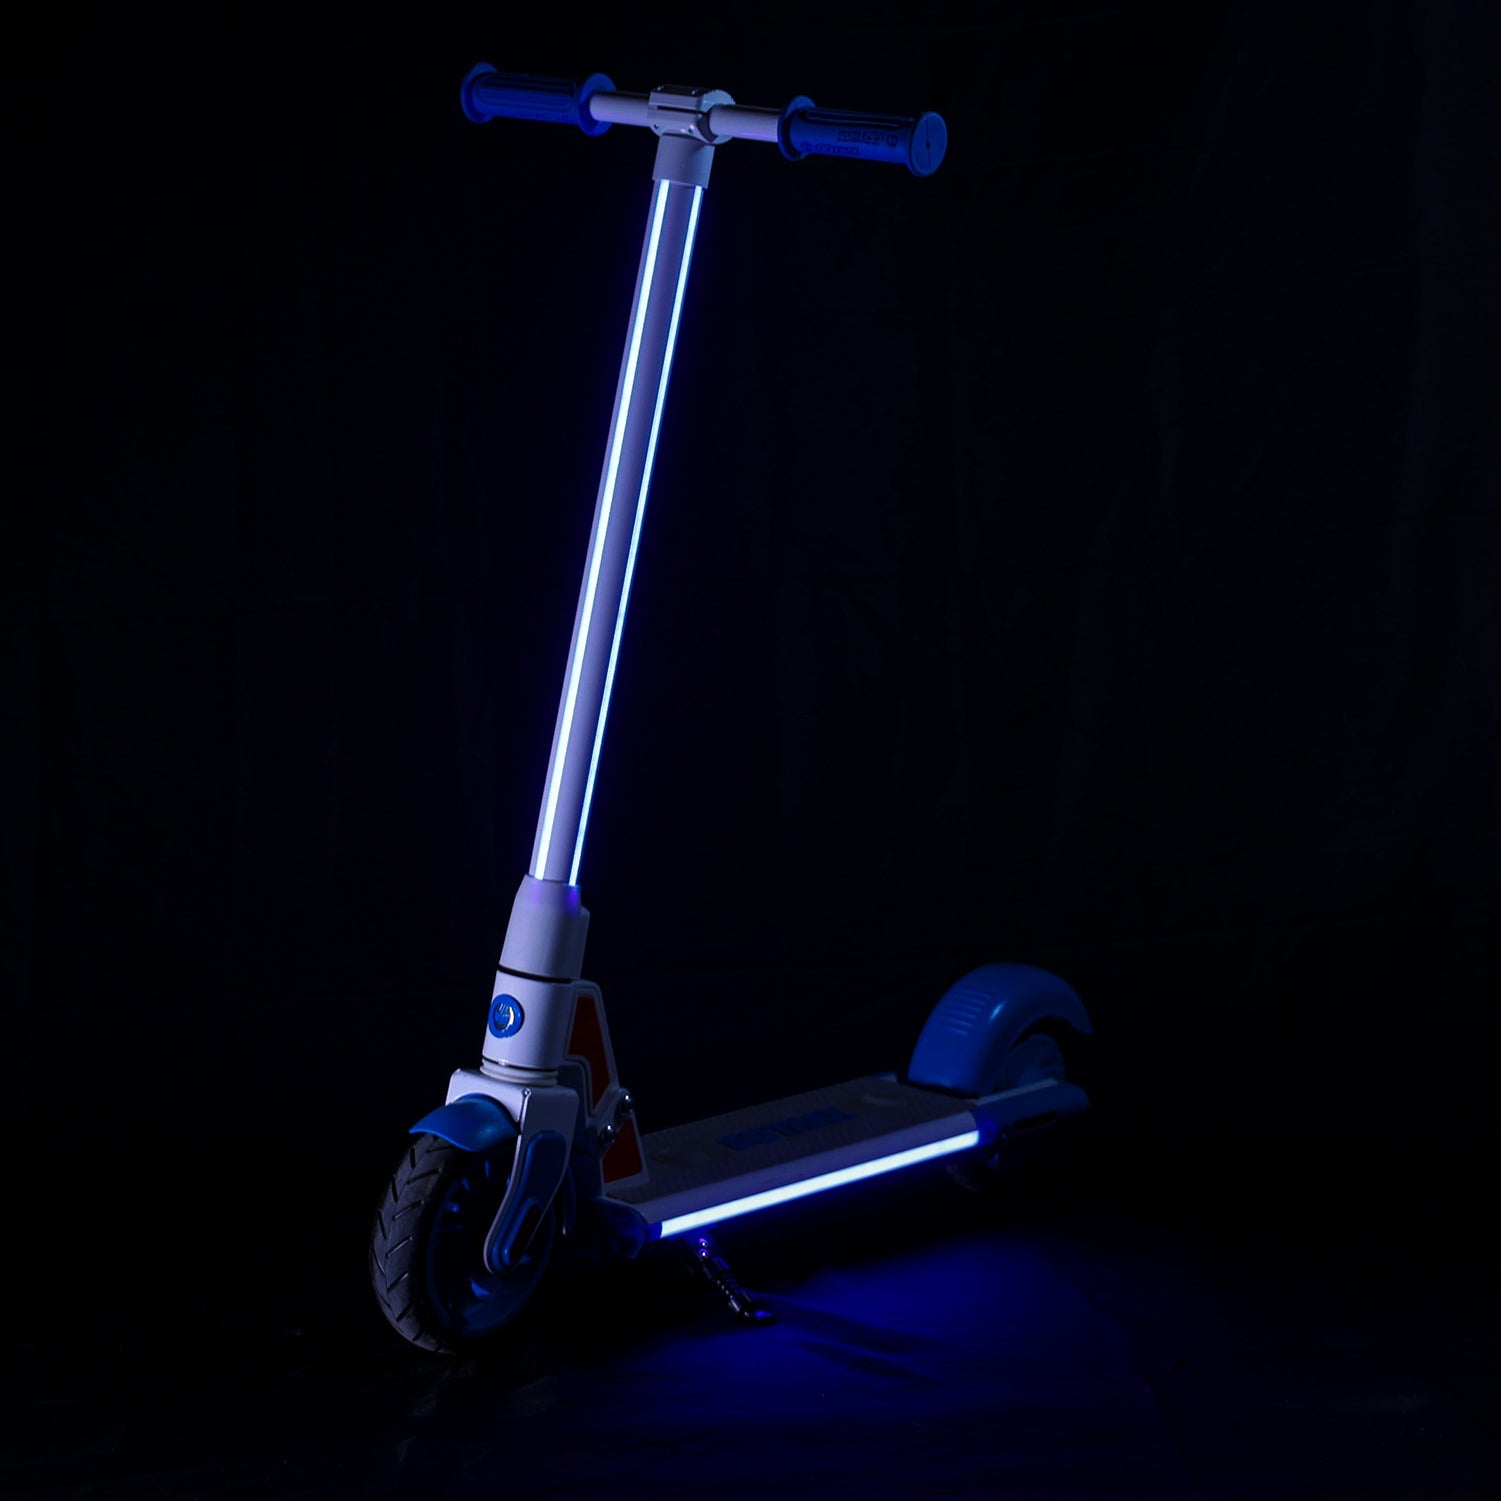 Gotrax GKS Series Electric Scooter for Kids Ages 6-12, Max 4/6.25 Miles  Range and 7.5 Mph Speed, 6 Solid Wheels UL2272 Certification, Lightweight